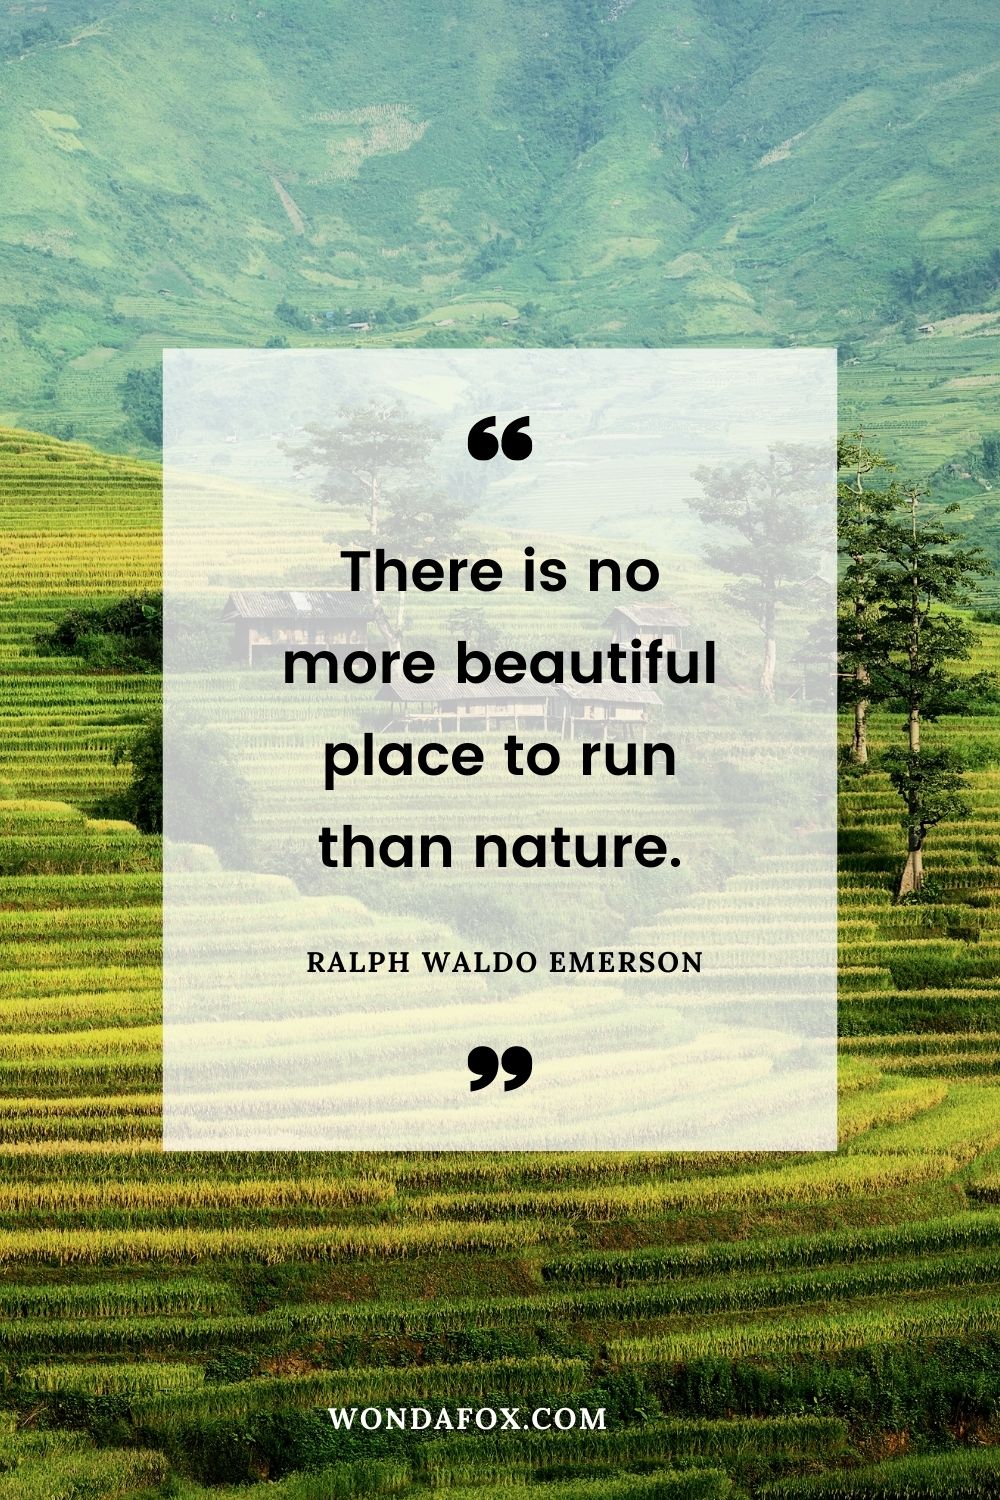 There is no more beautiful place to run than nature.